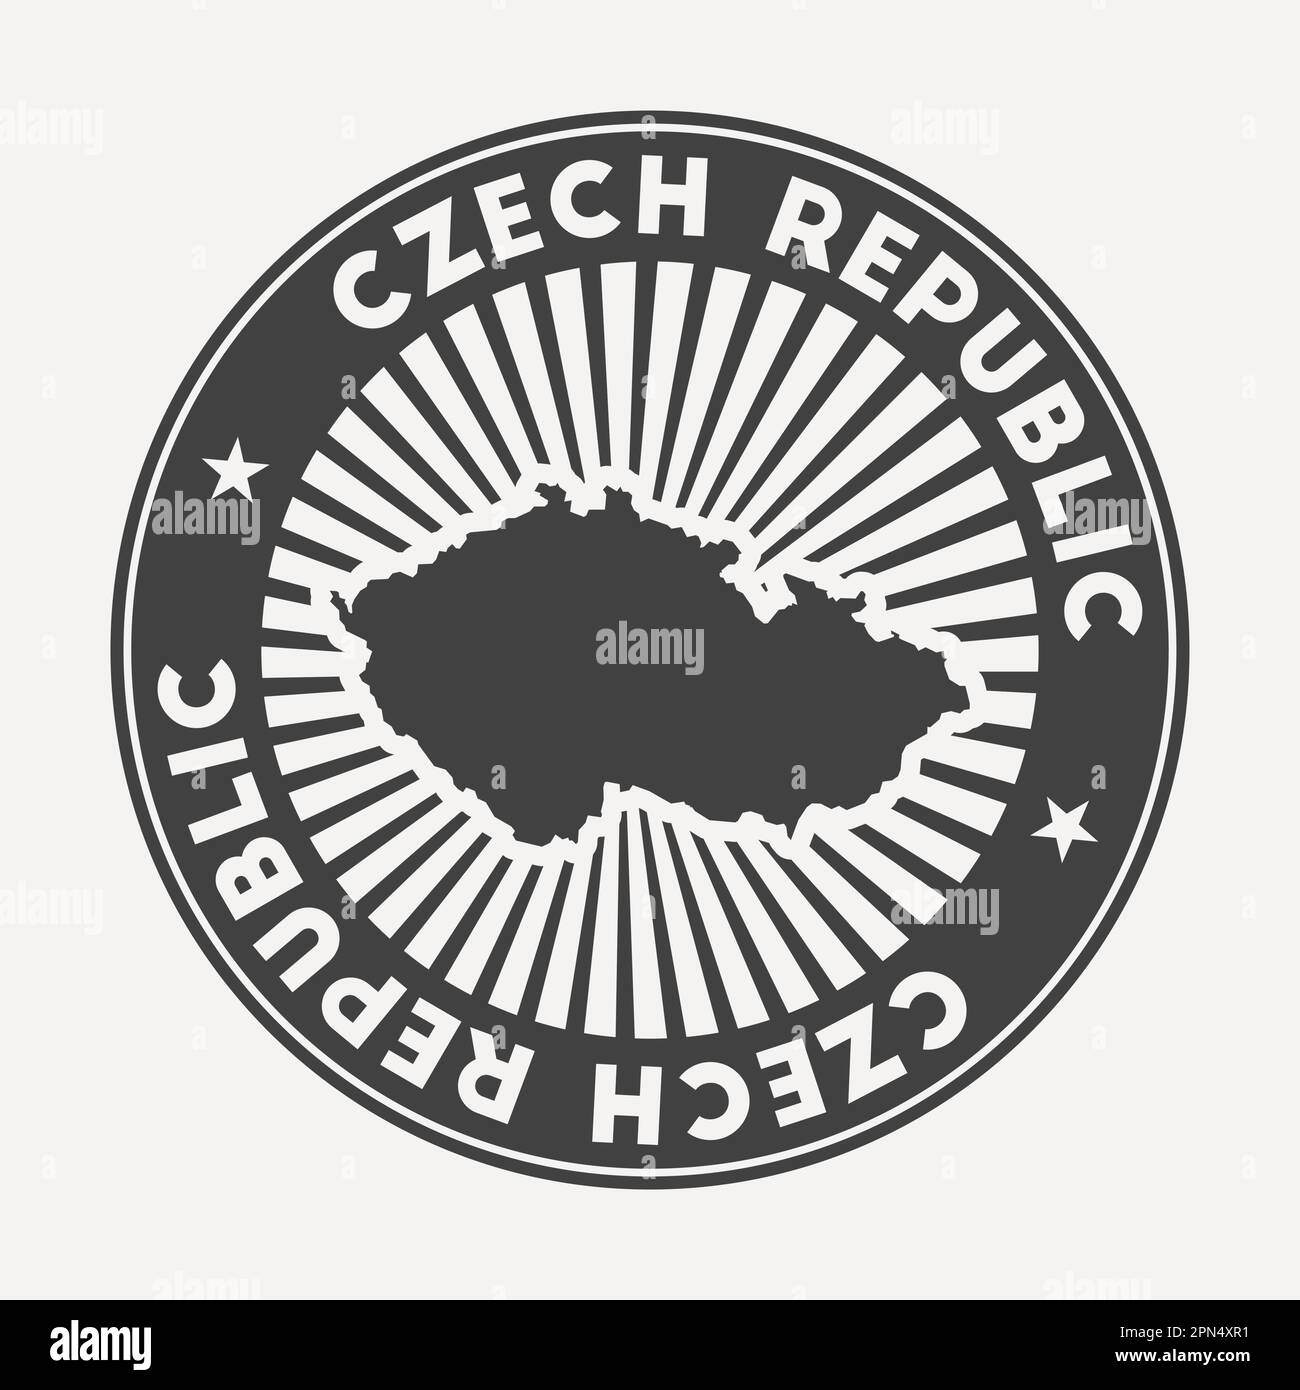 Czech Republic round logo. Vintage travel badge with the circular name and map of country, vector illustration. Can be used as insignia, logotype, lab Stock Vector